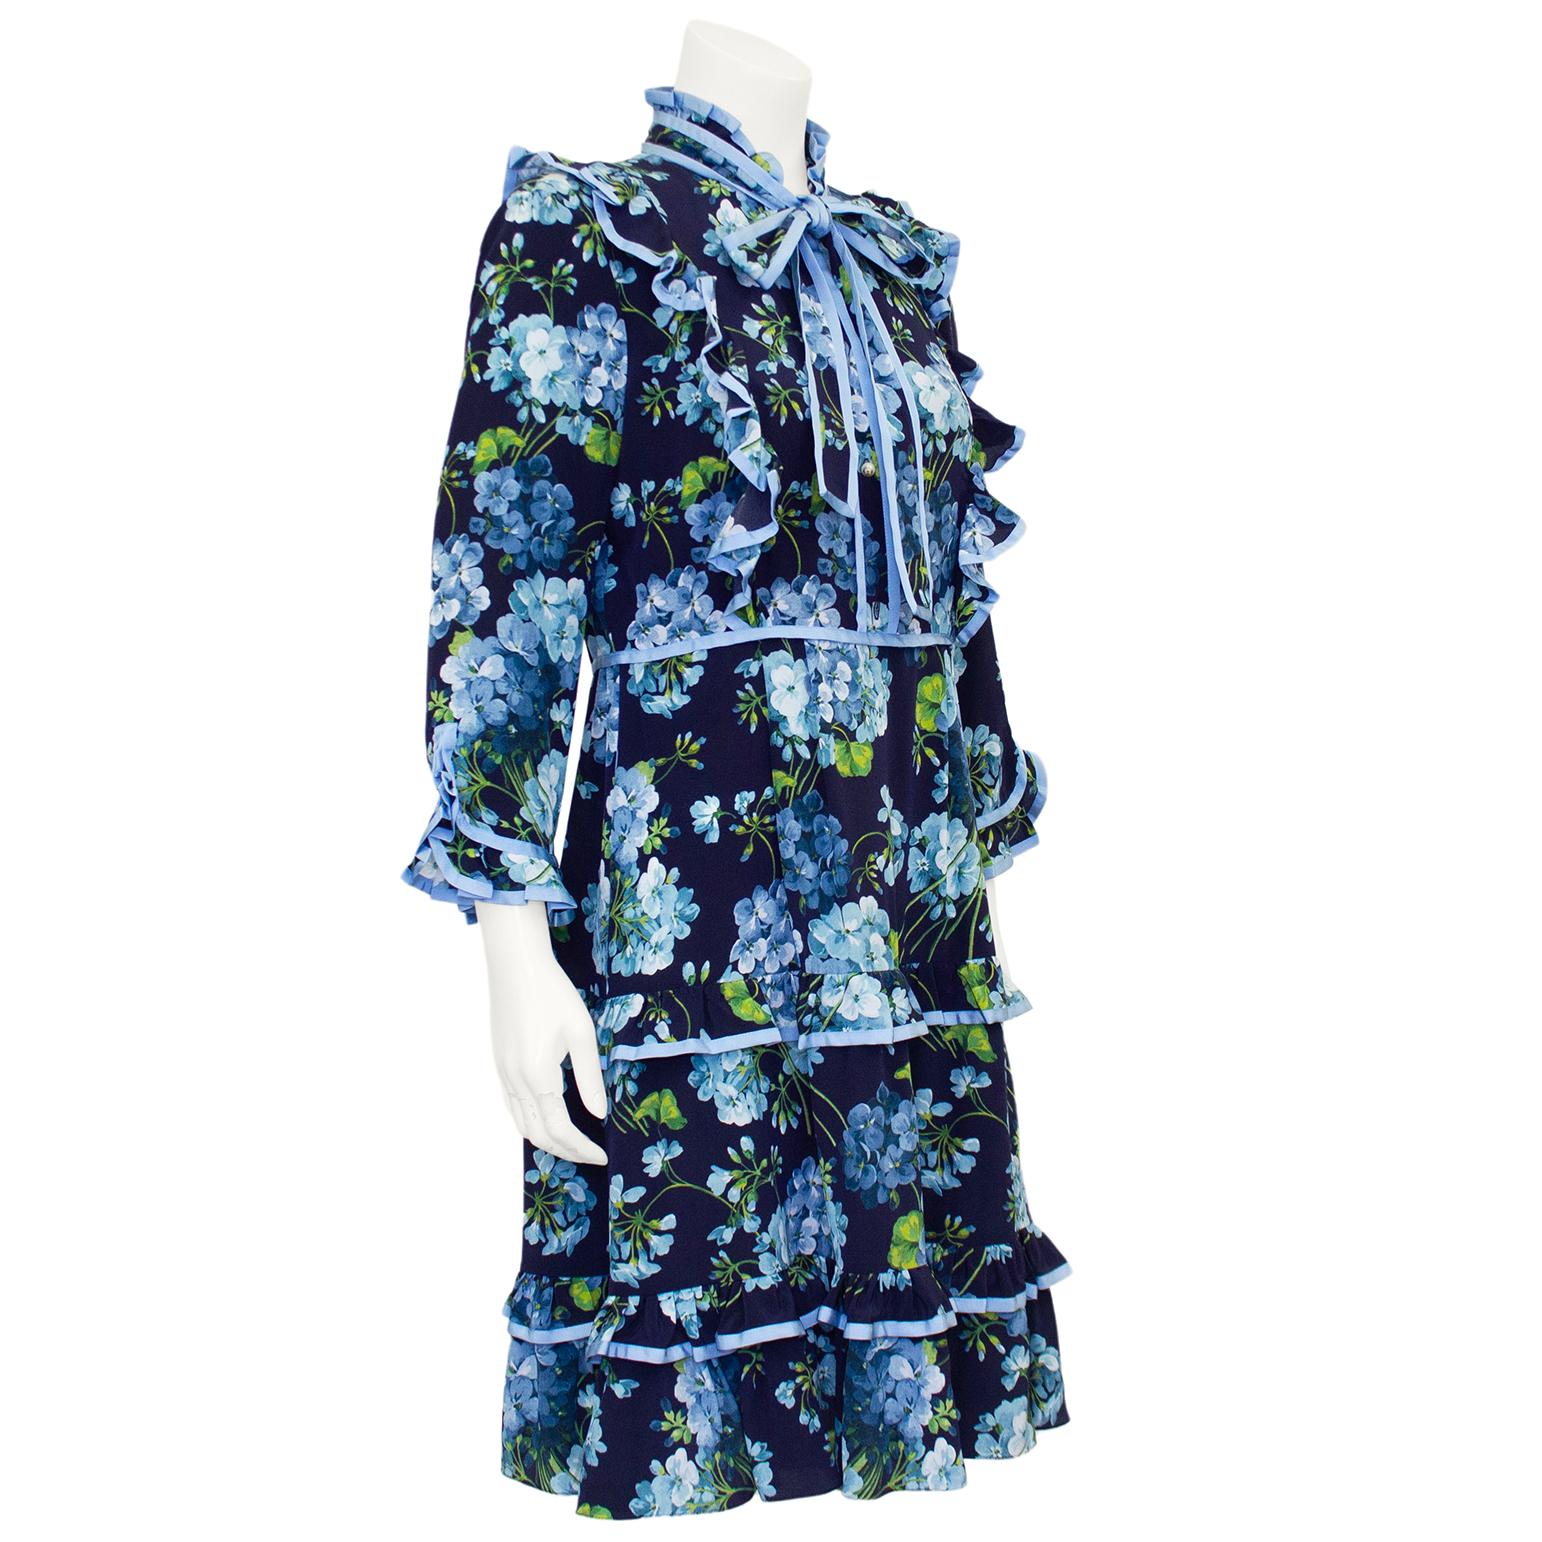 Gucci 2016 pre fall silk crepe floral printed maximalist dress by Alessandro Michele. Navy blue with all over pale blue and green hydrangea print. Ruffled neckline, yoke, cuffs and skirt. High neckline with pussy bow tie with faux pearl Gucci